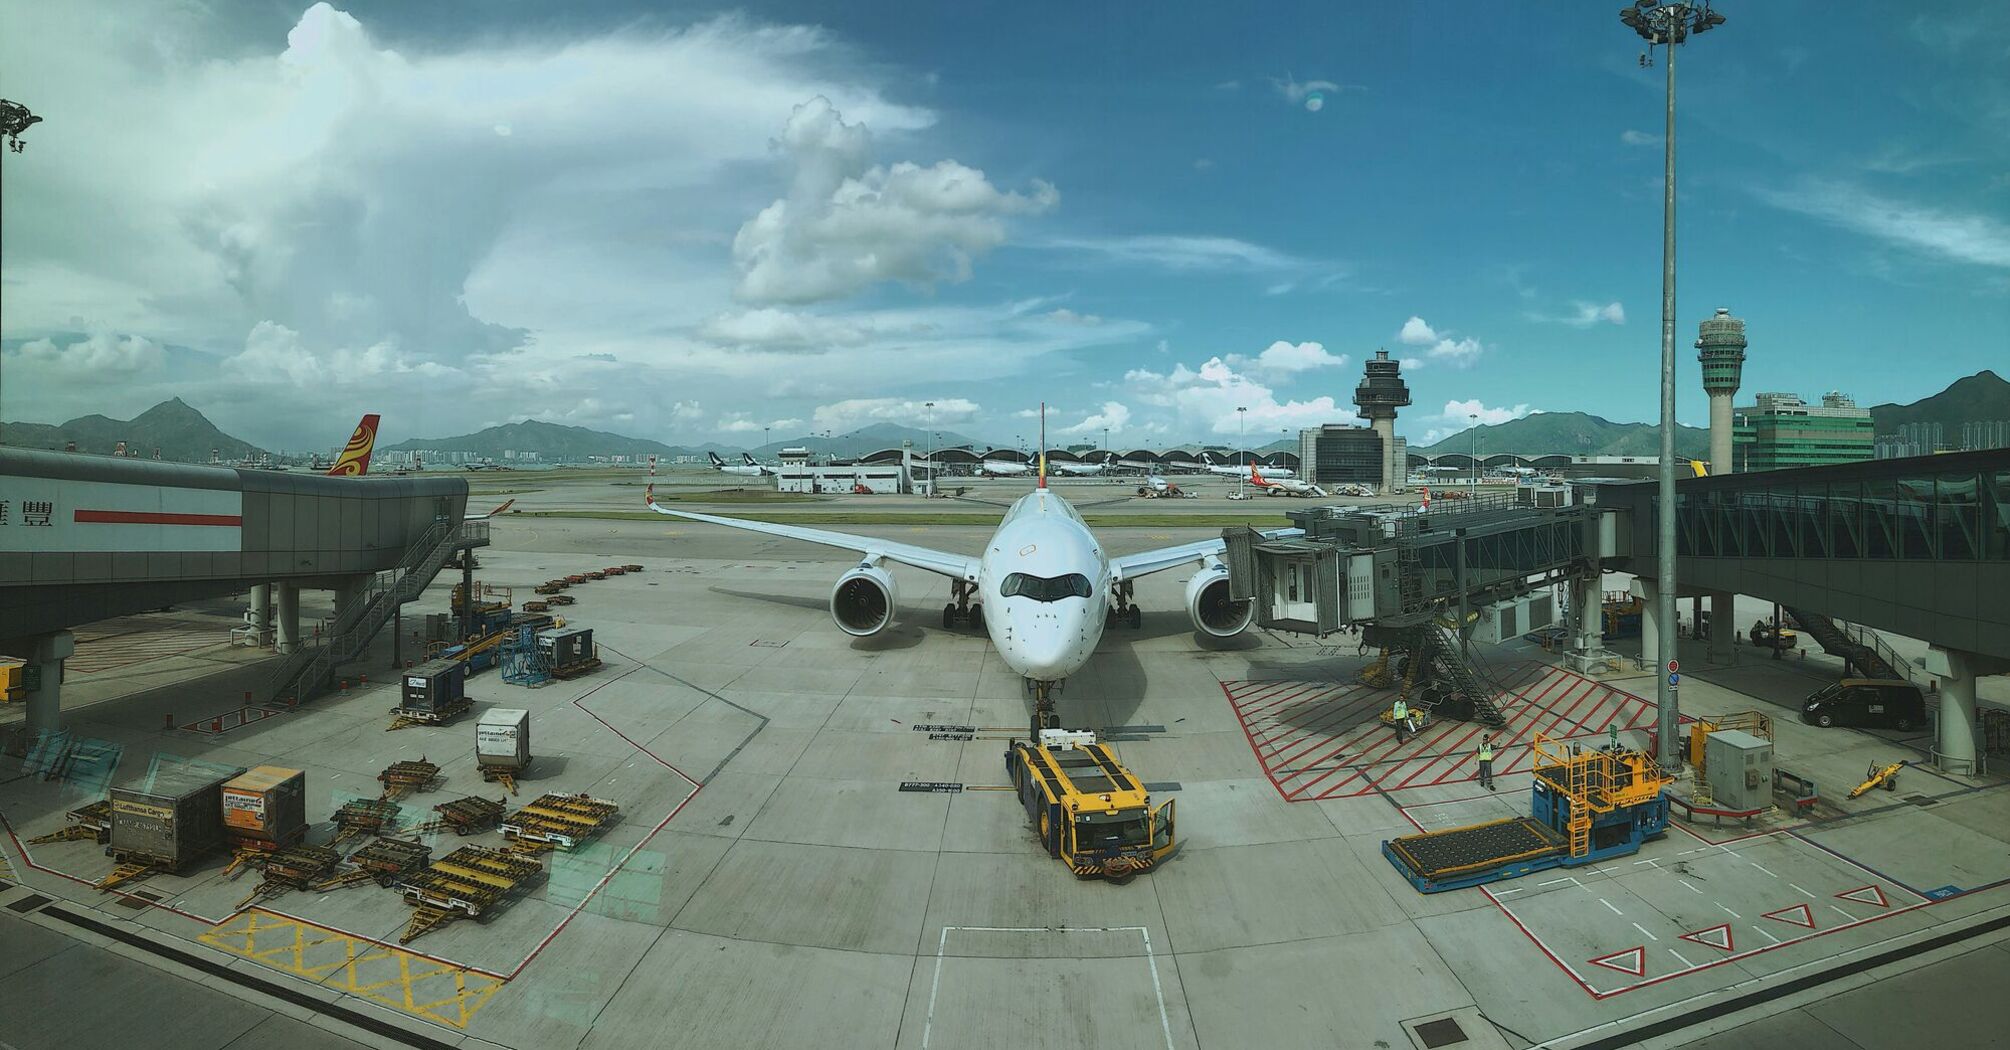 An airport worker in Hong Kong tragically died when he fell from a evacuator under the plane